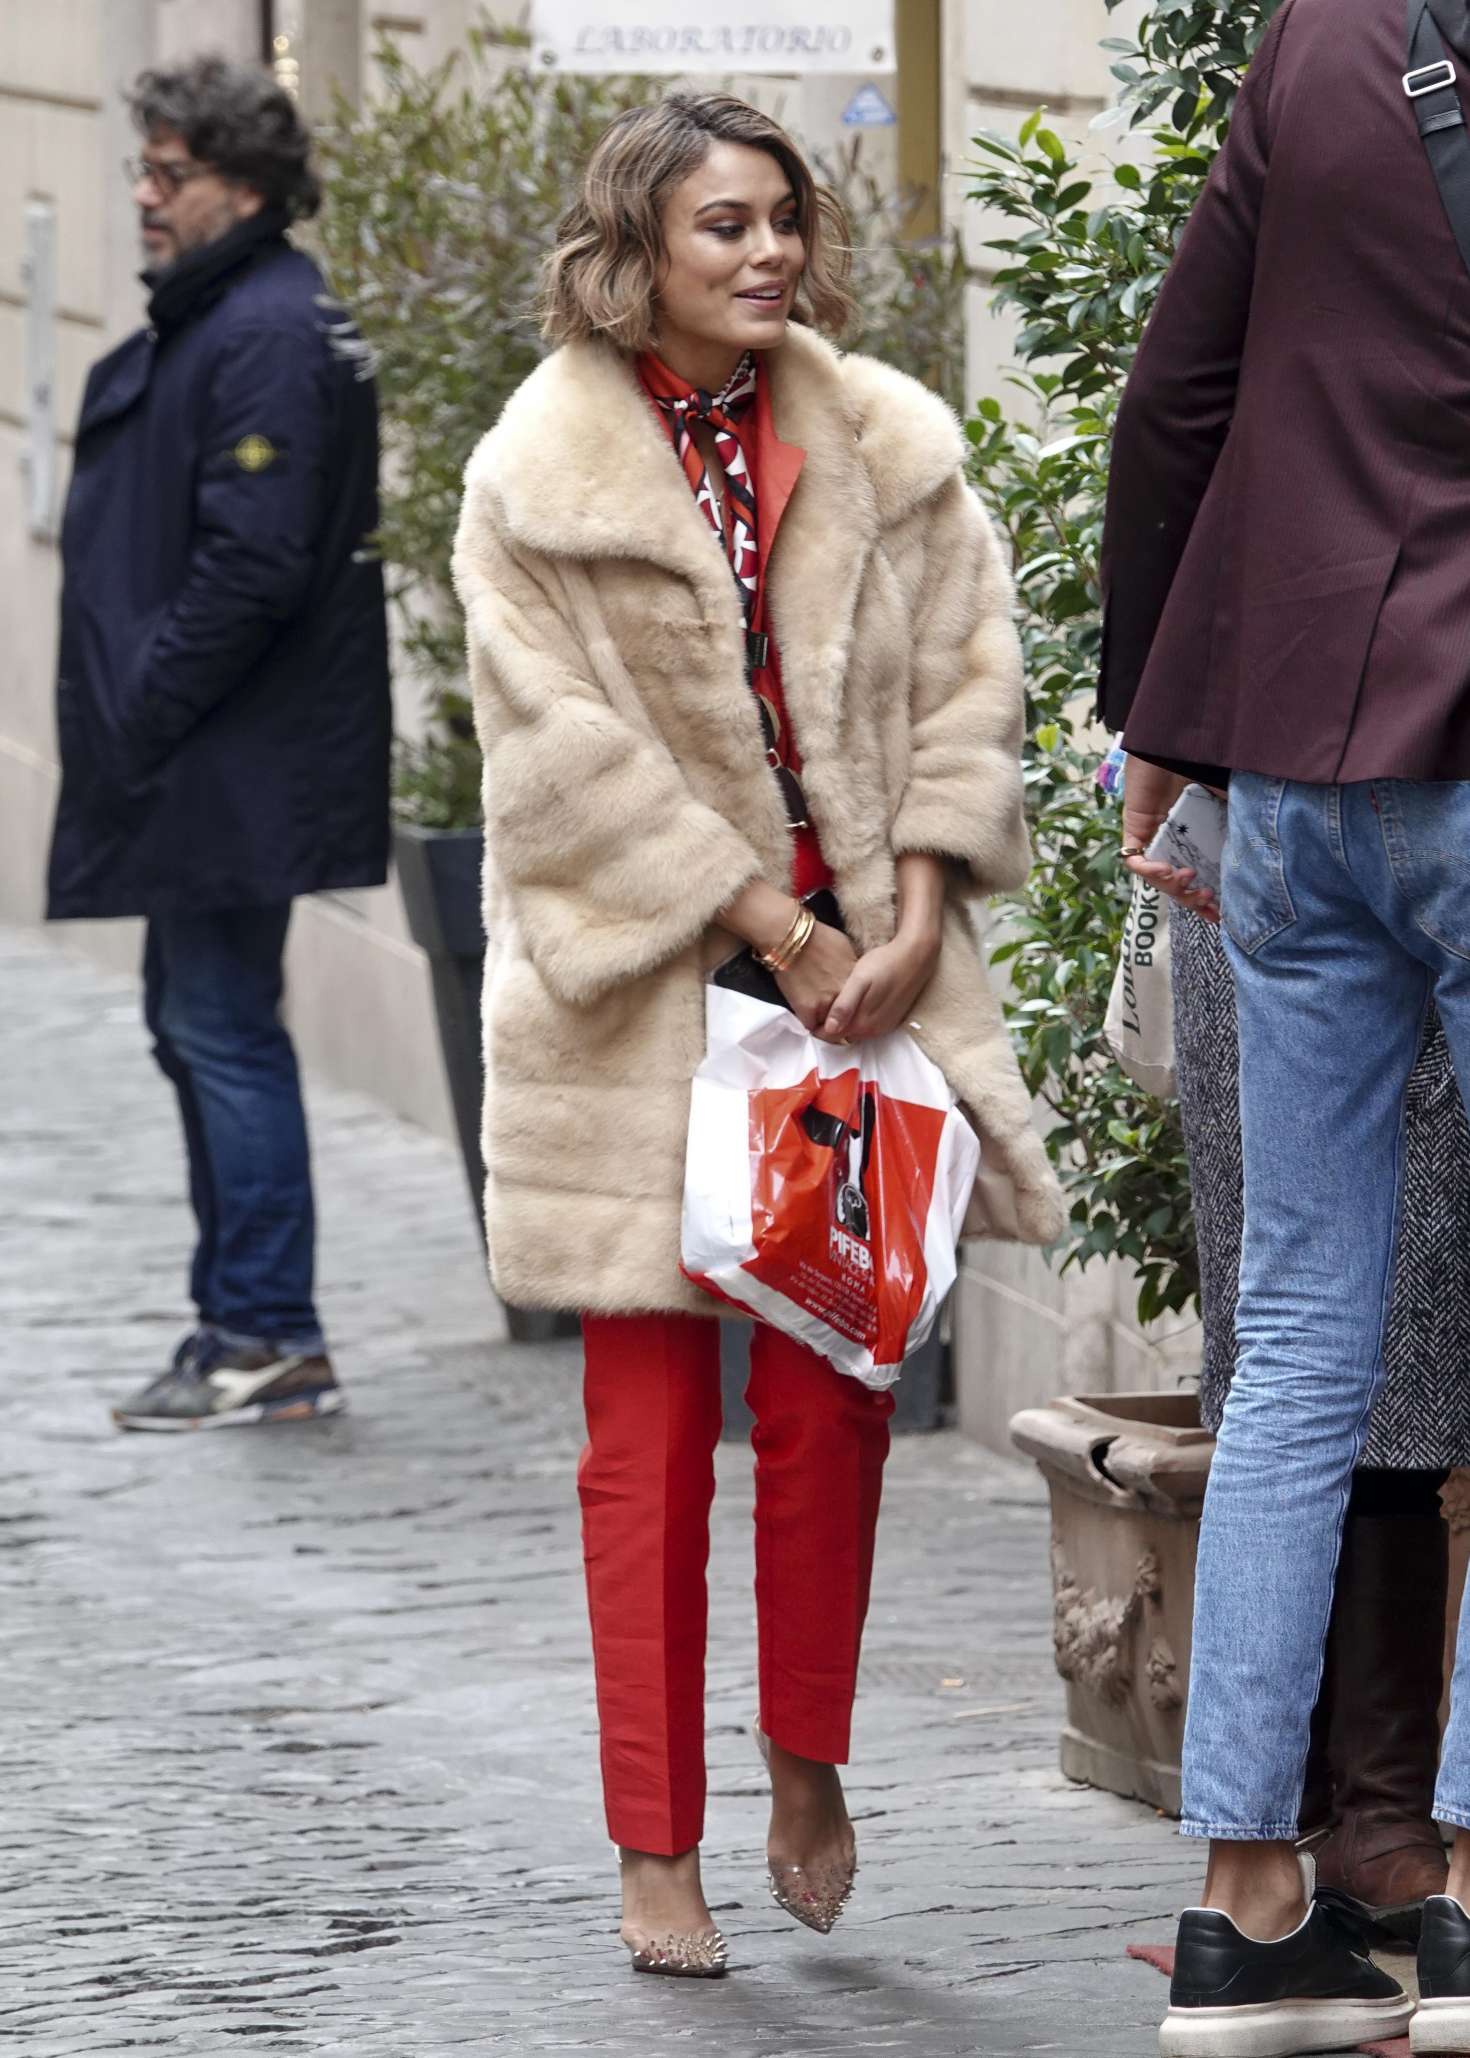 Nathalie Kelley in Fur Coat â€“ Out and about in Rome